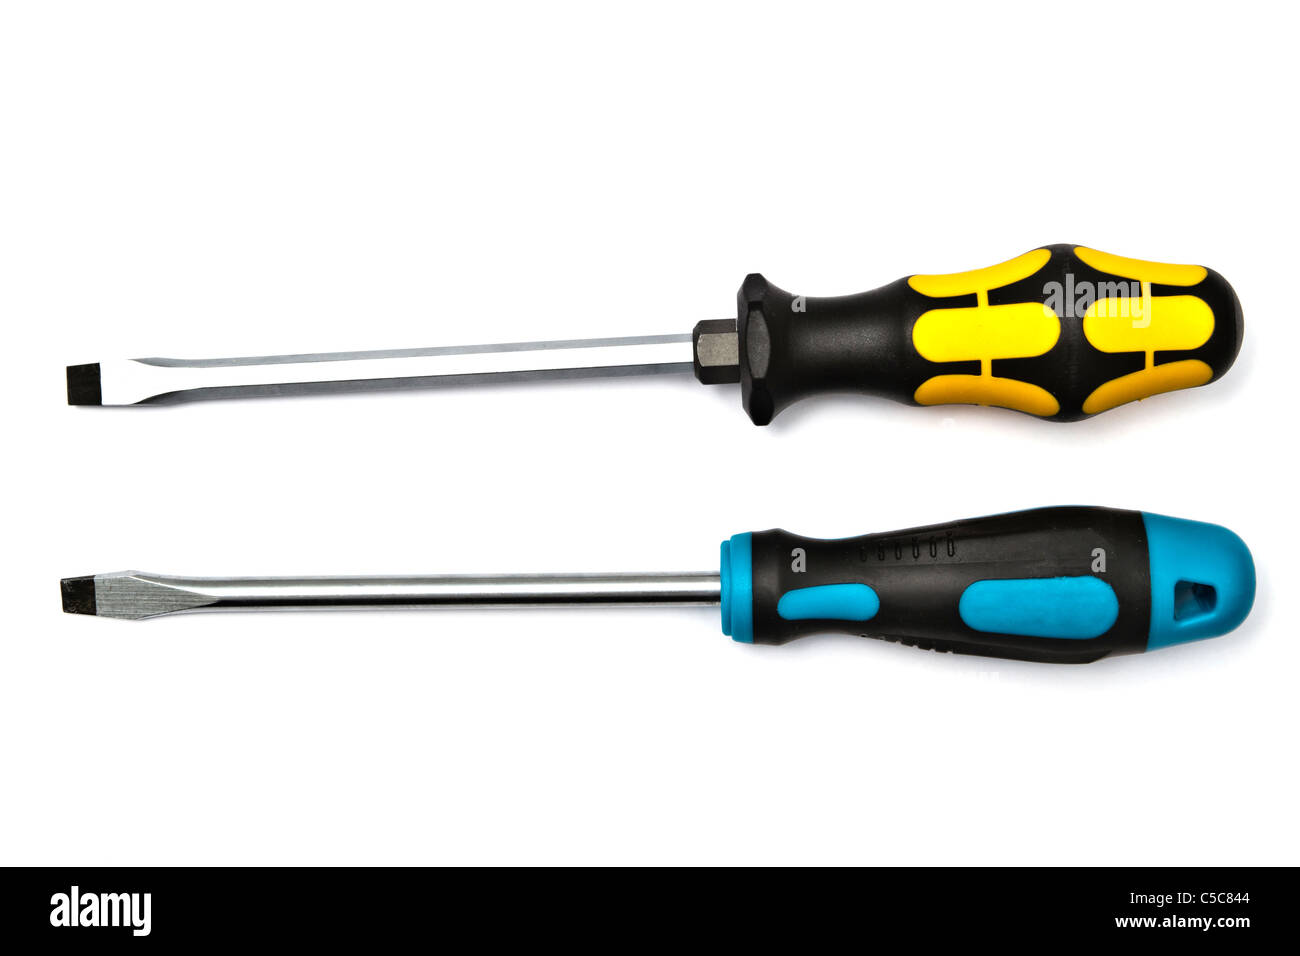 Yellow and blue screwdrivers isolated on white background Stock Photo